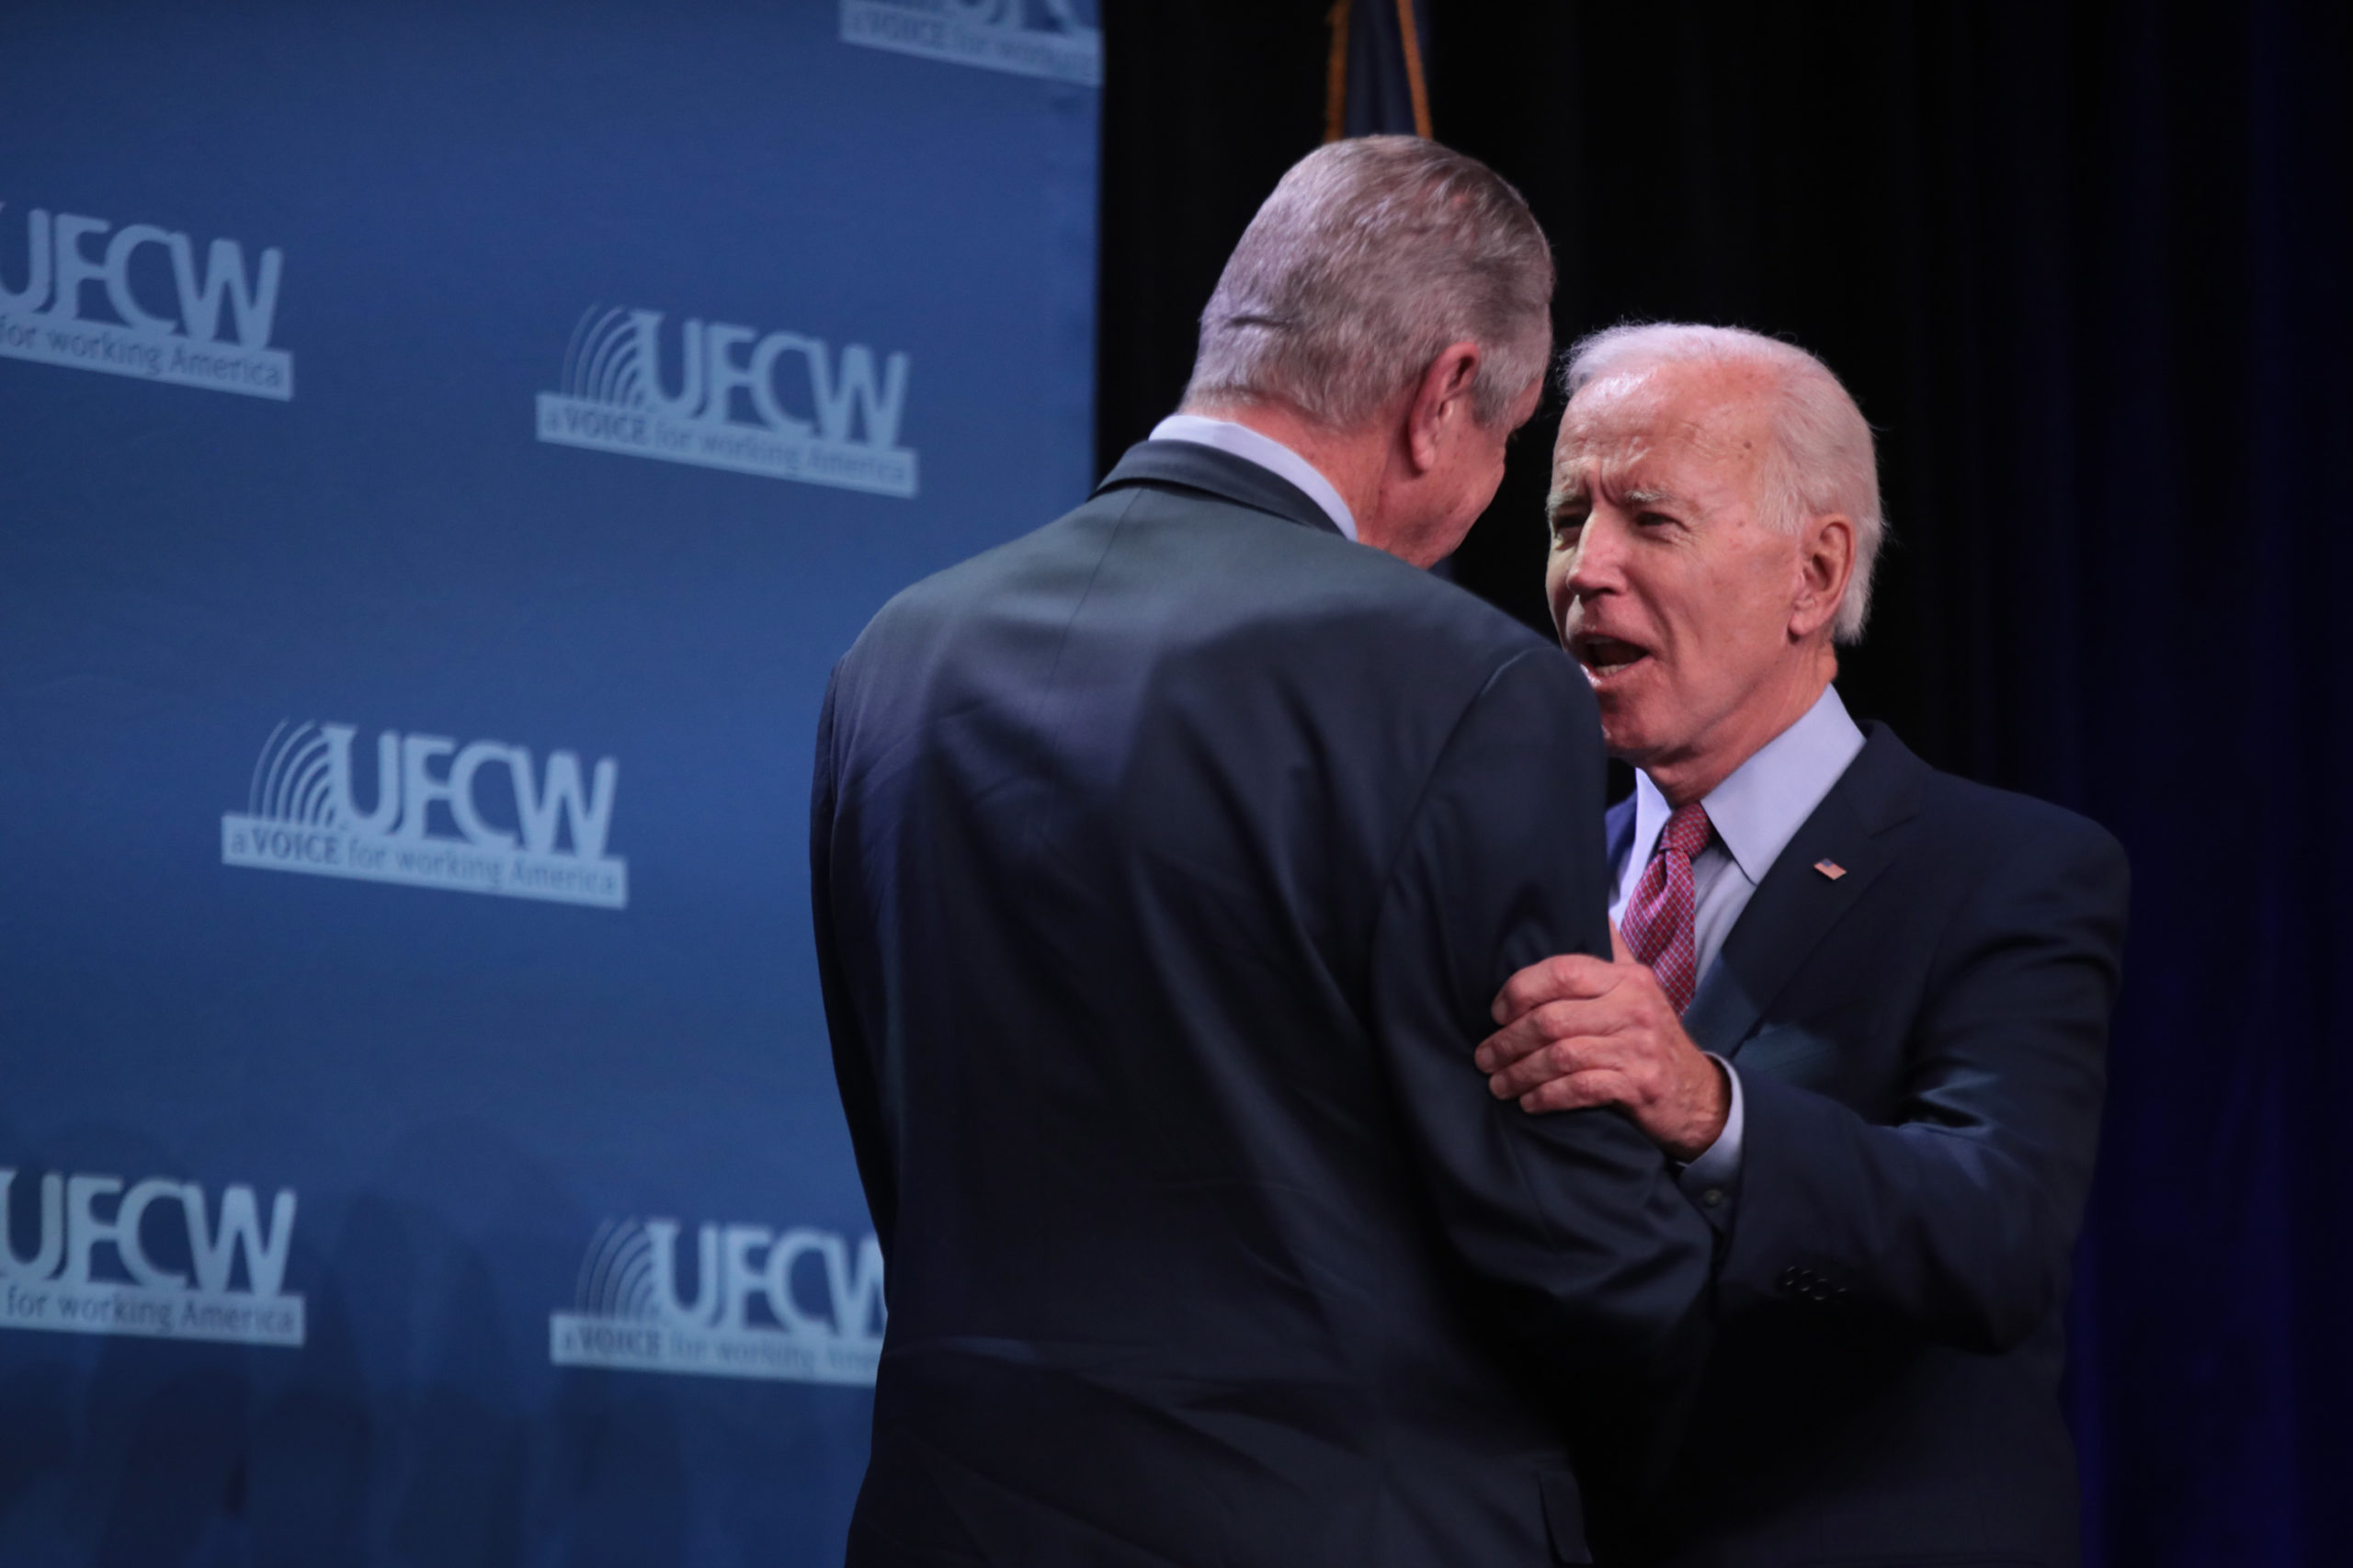 UFCW president Marc Perrone greets former Vice President Joe Biden at the union's 2020 presidential candidate forum in Altoona, Iowa. (Scott Olson/Getty Images)